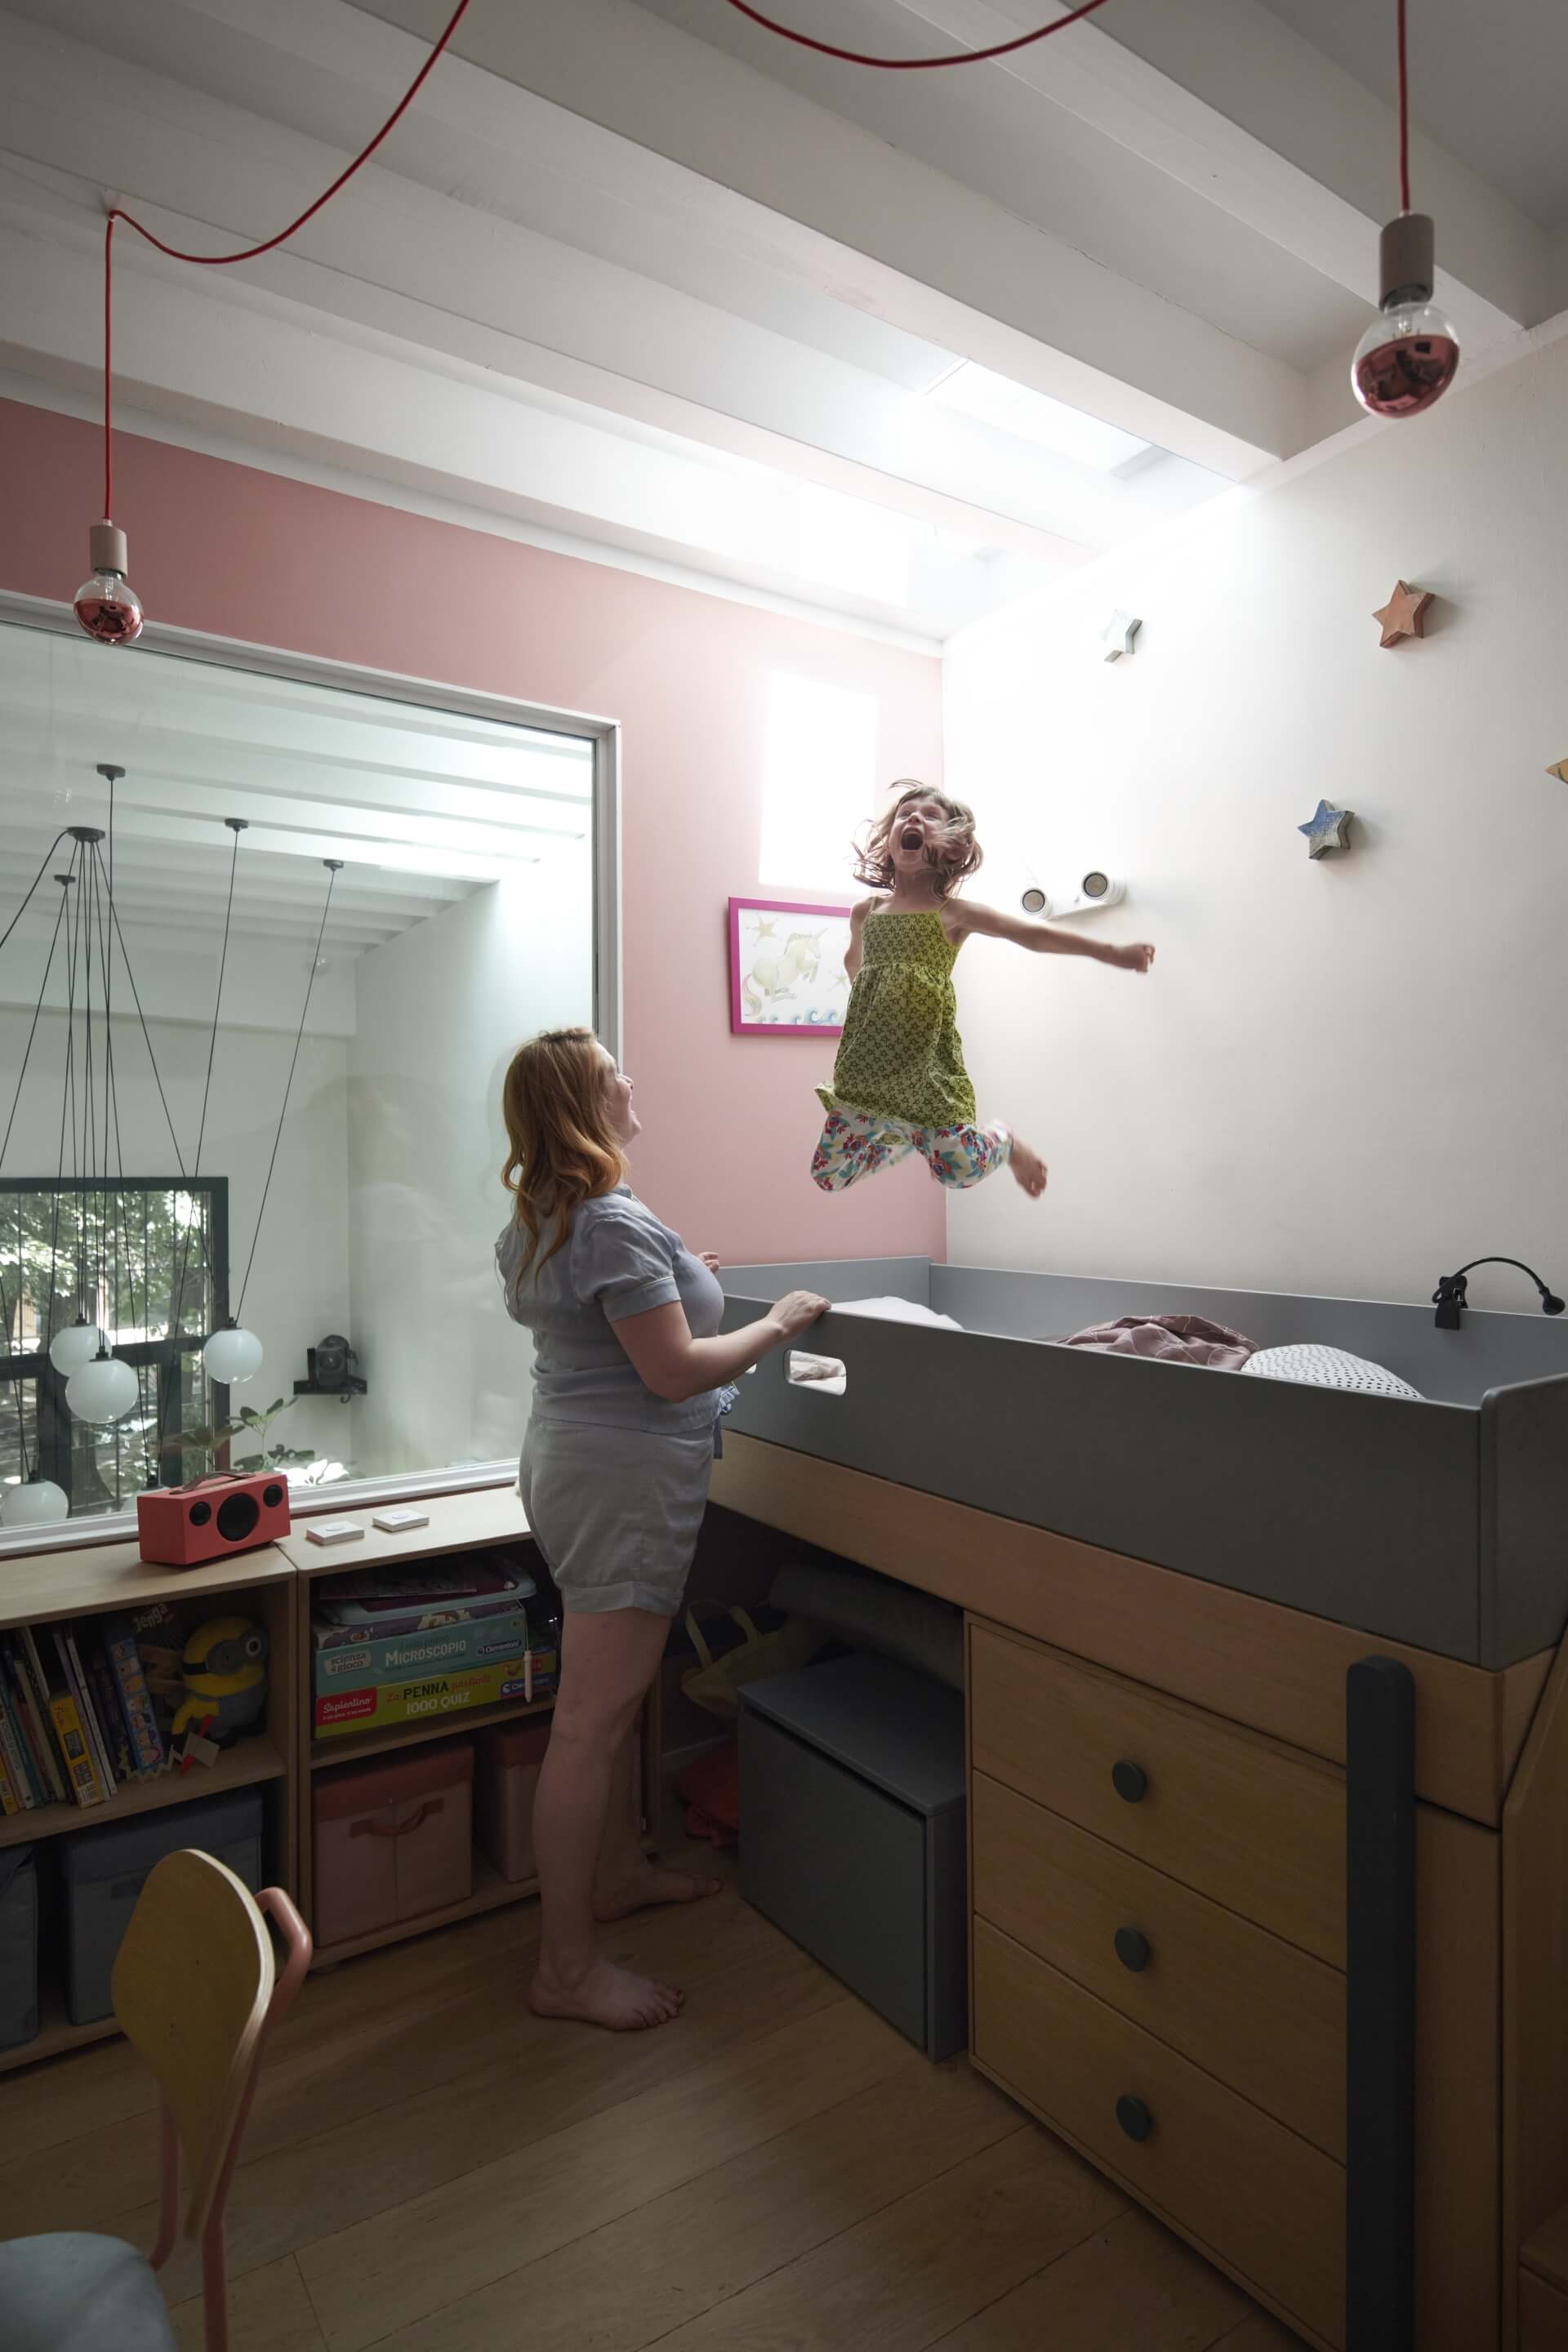 A girl jumping on the bed. Woman standing next to the bed.